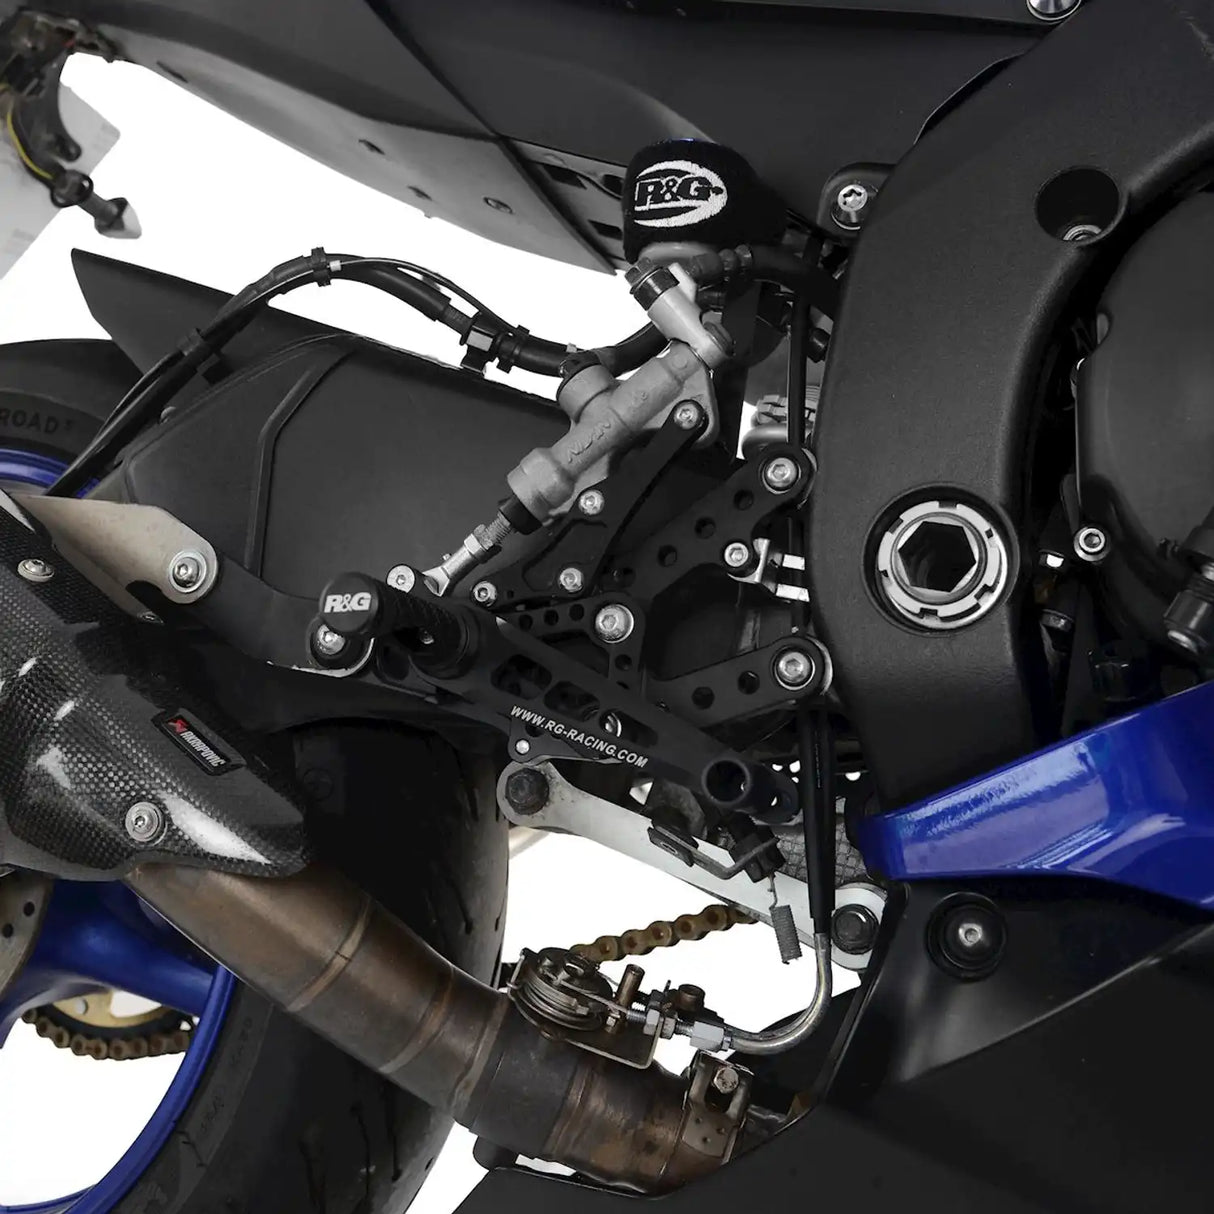 R&G Adjustable Rearsets for Yamaha YZF-R6 '17-